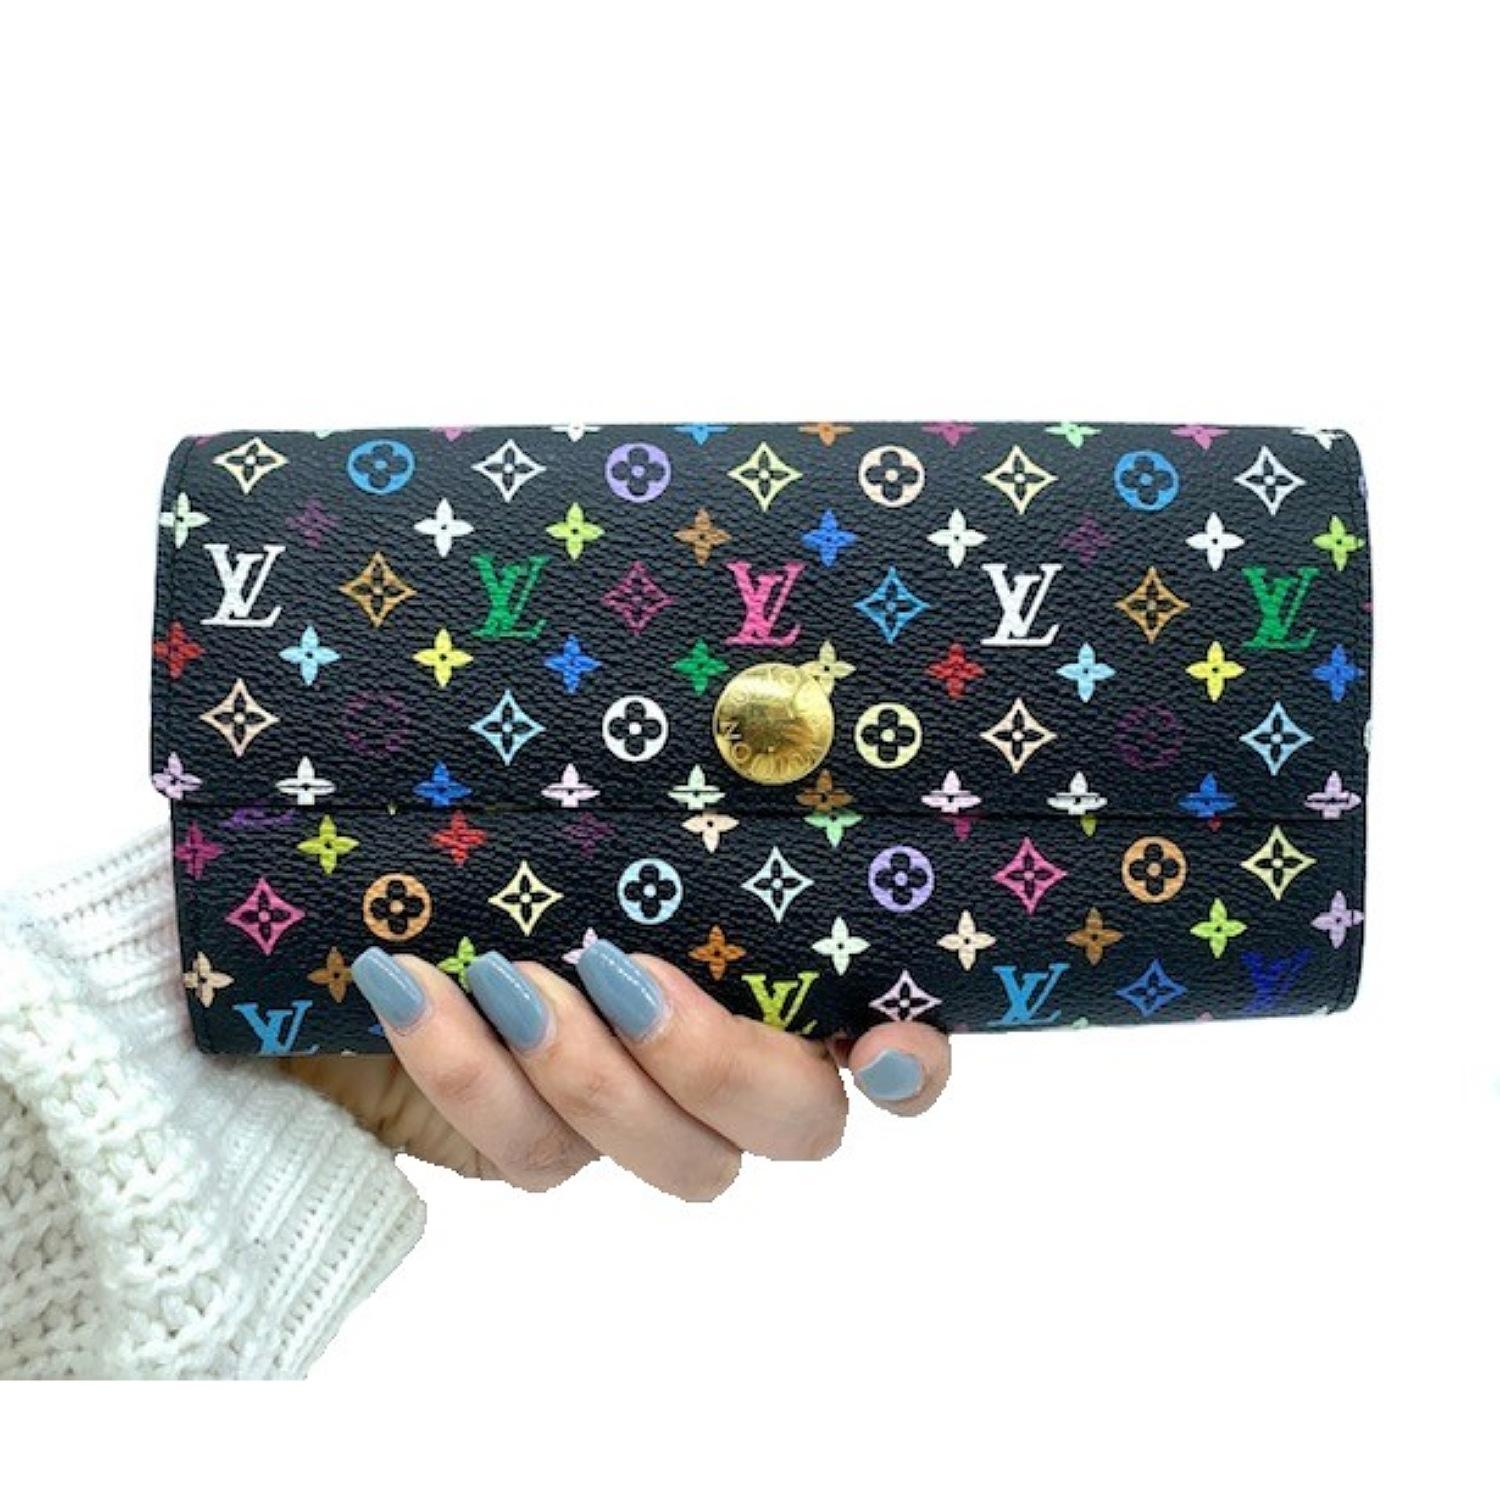 This Louis Vuitton Black Multicolore Monogram Canvas Sarah Wallet is the most elegant way to organize your essentials like your bills, currency, credit cards and plenty of coins. This delightful piece will always be a popular and timeless classic.